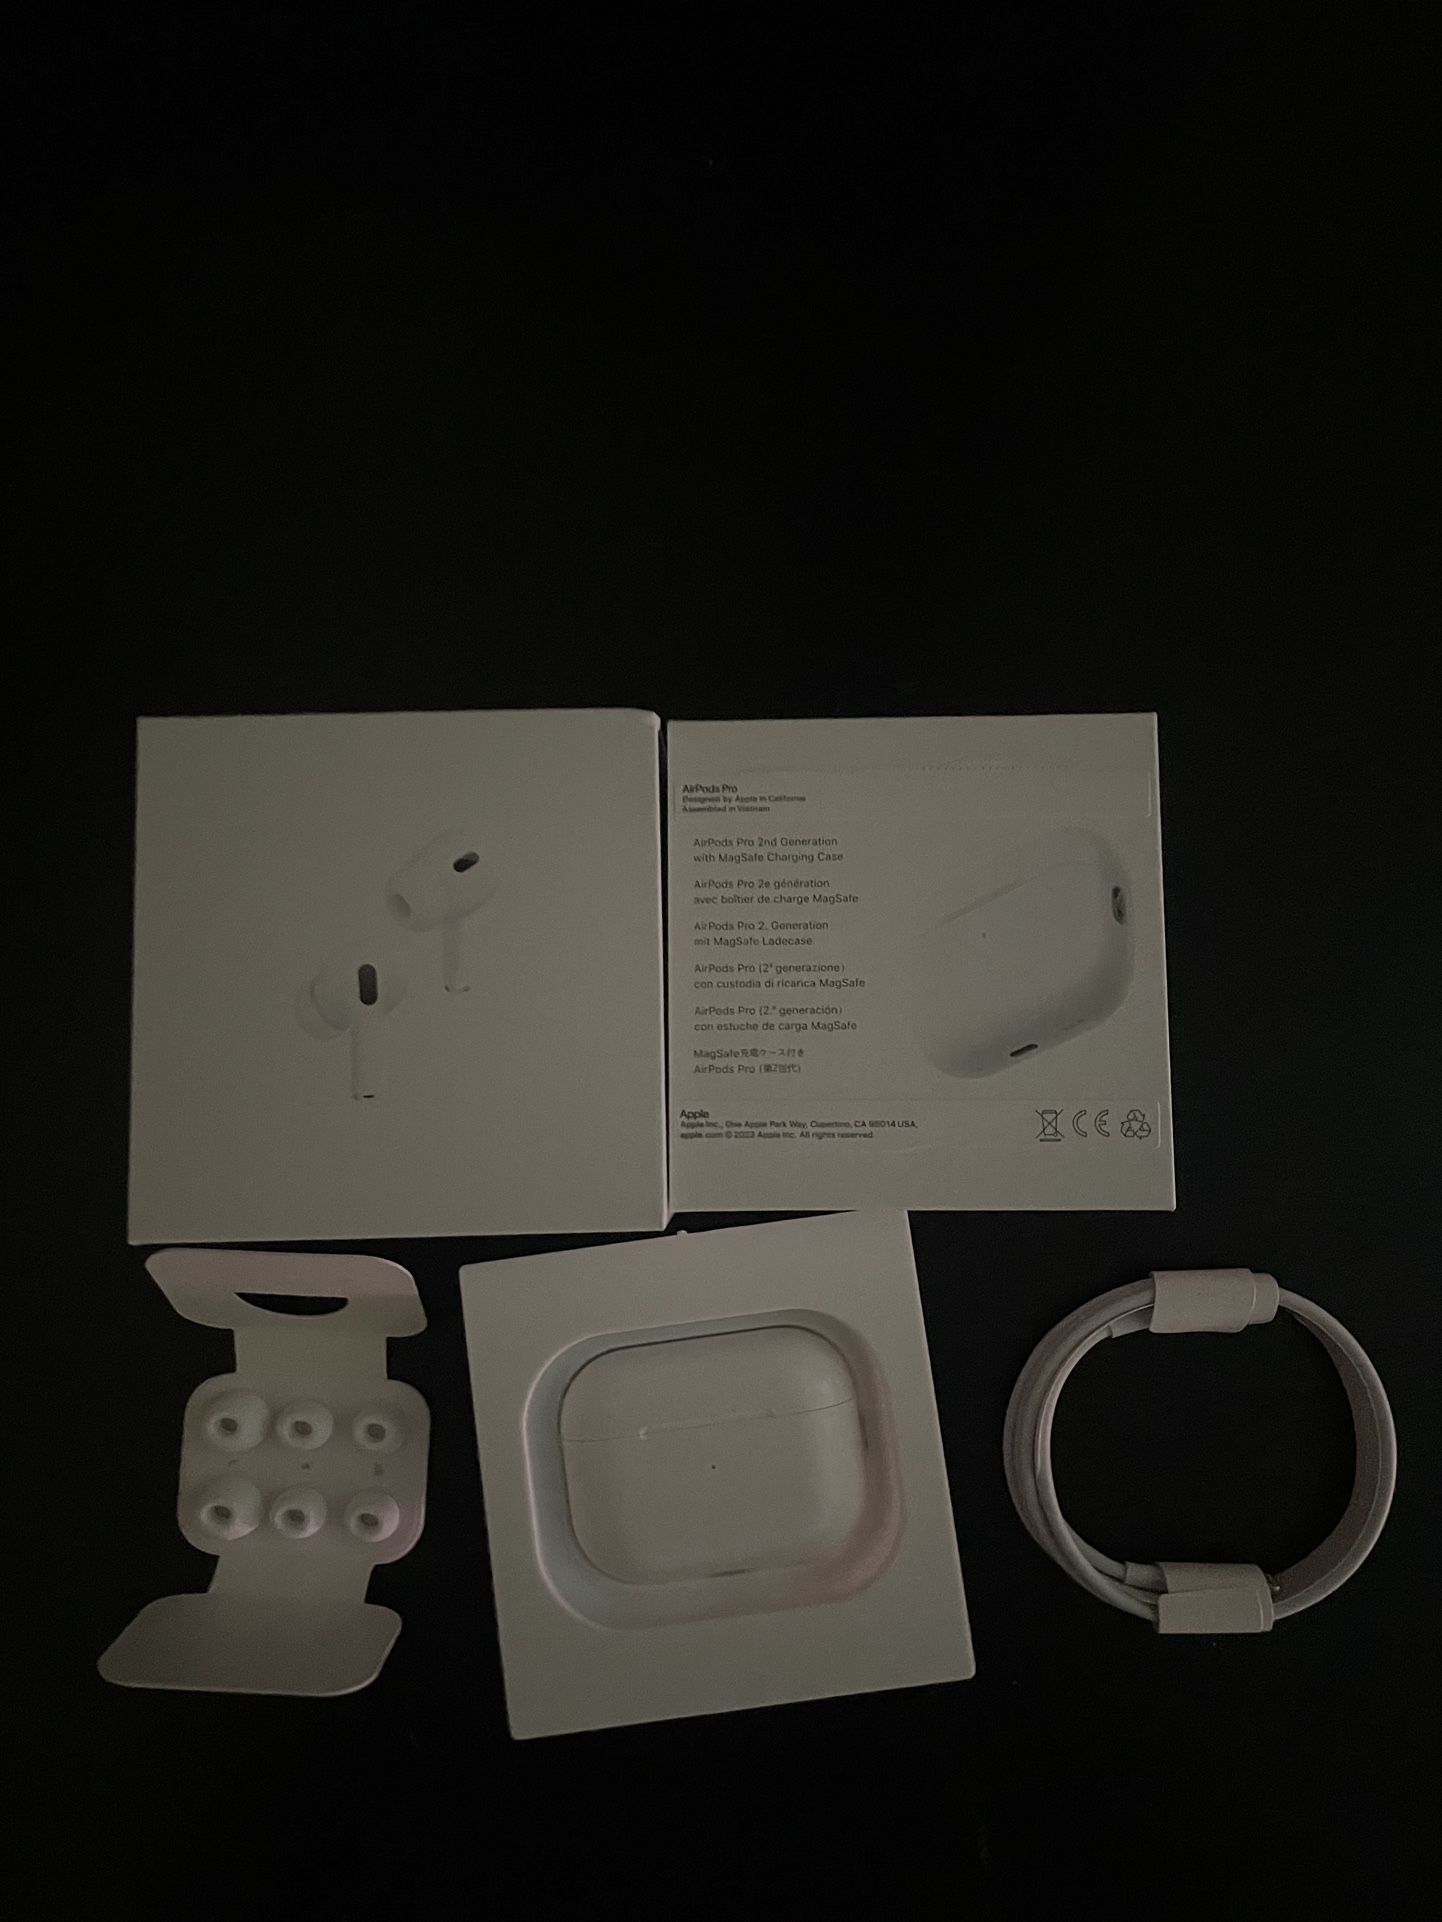 Airpods pro’s 2 *THROW A PRICE